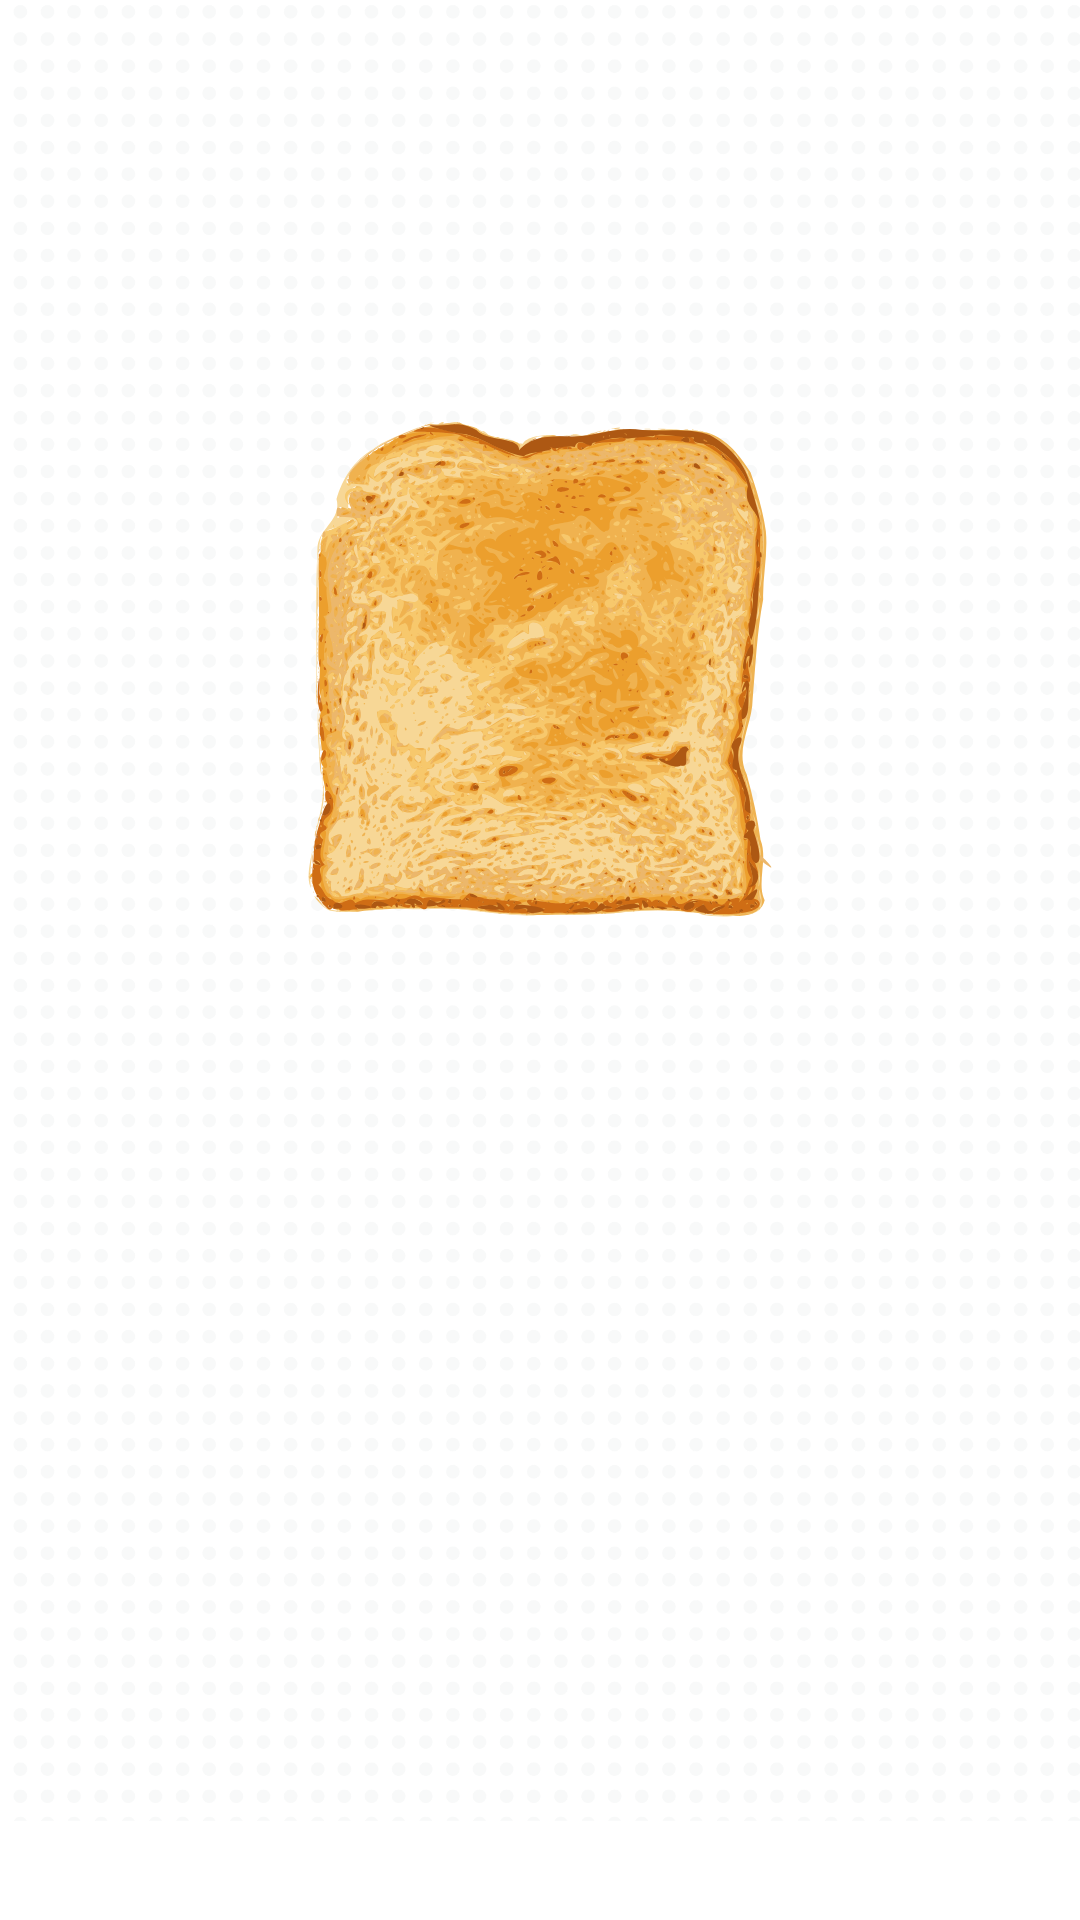 Toast Wallpapers